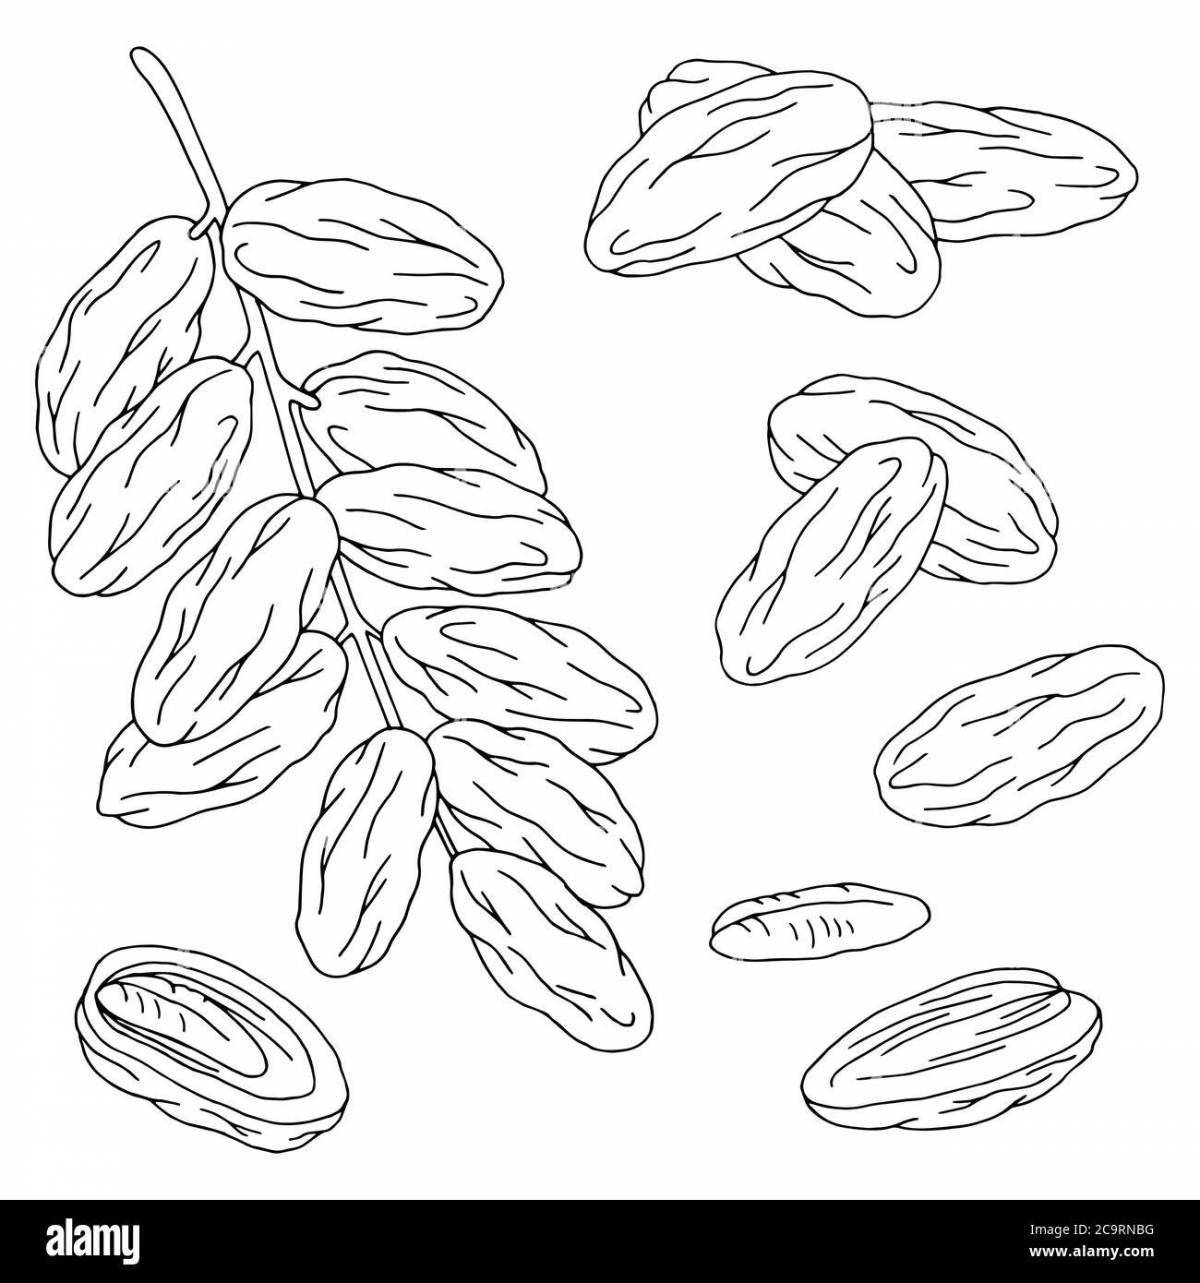 Juicy dried fruits coloring page